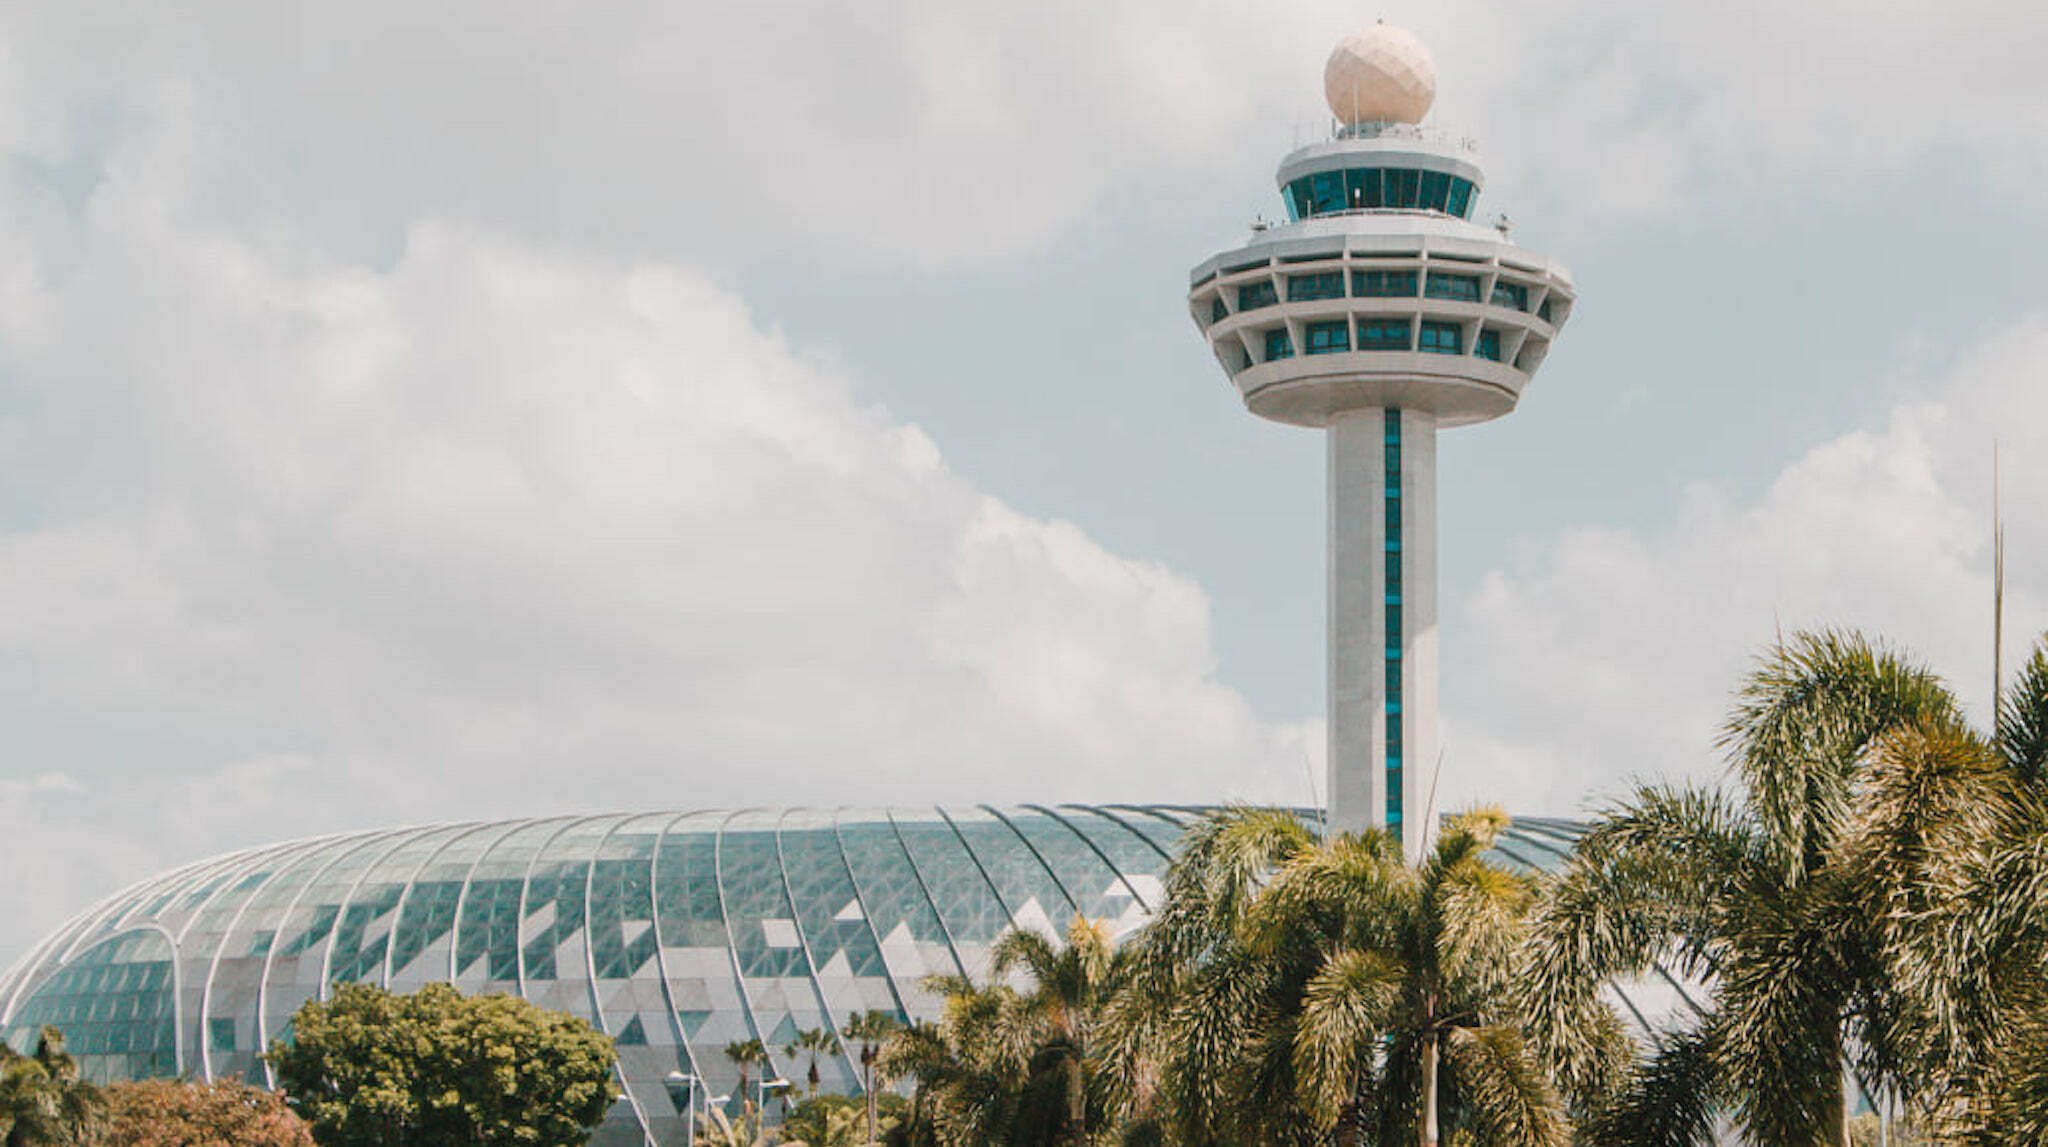 Singapore Changi Airport is world's best, PH out of top 100 -- survey